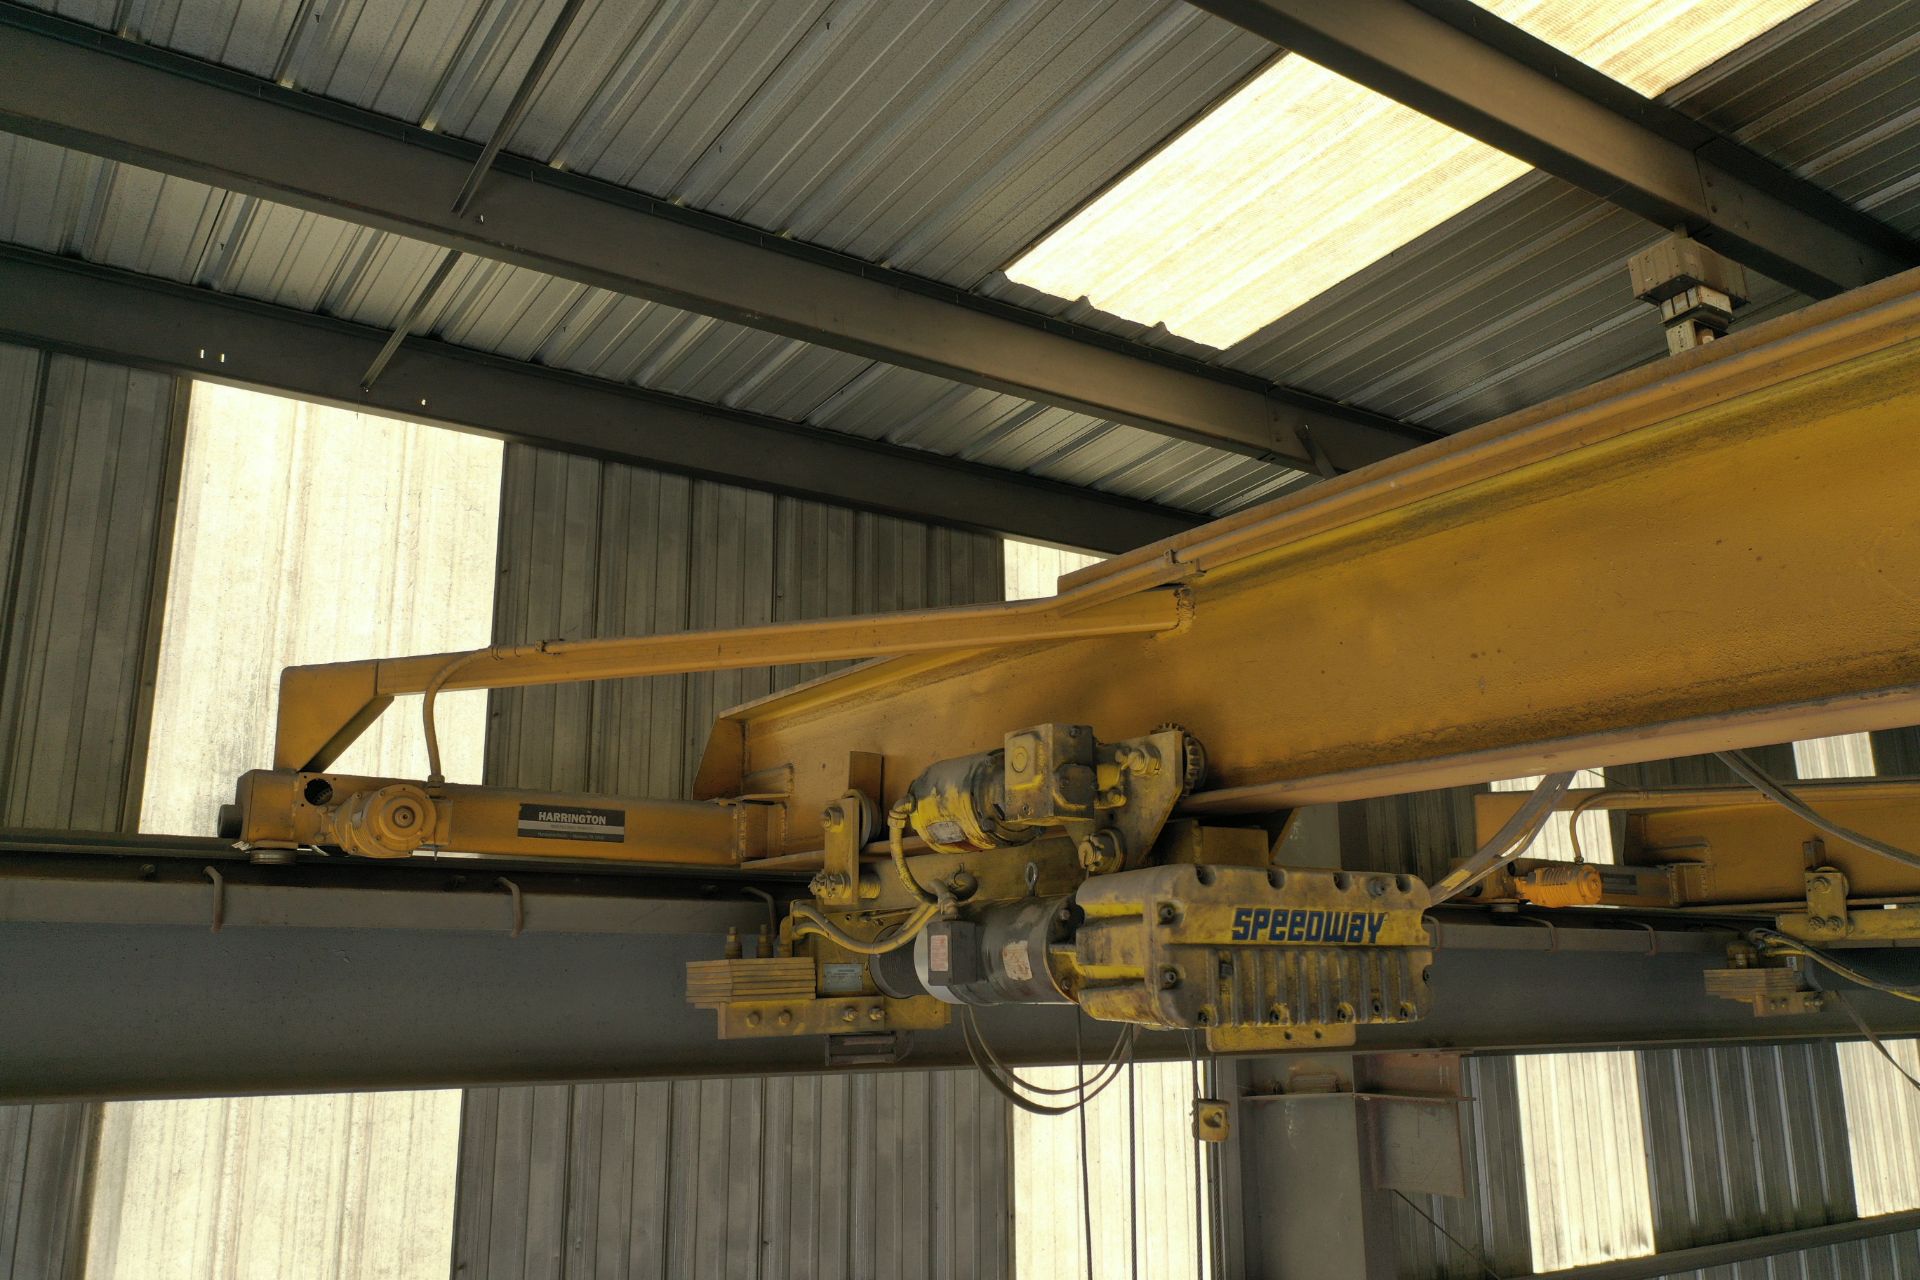 Evans 3 Ton Overhead Crane SN: 2479B with 3 Ton Hoist & Pendant Control, Approx 40 ft Span (LOCATION - Image 5 of 7